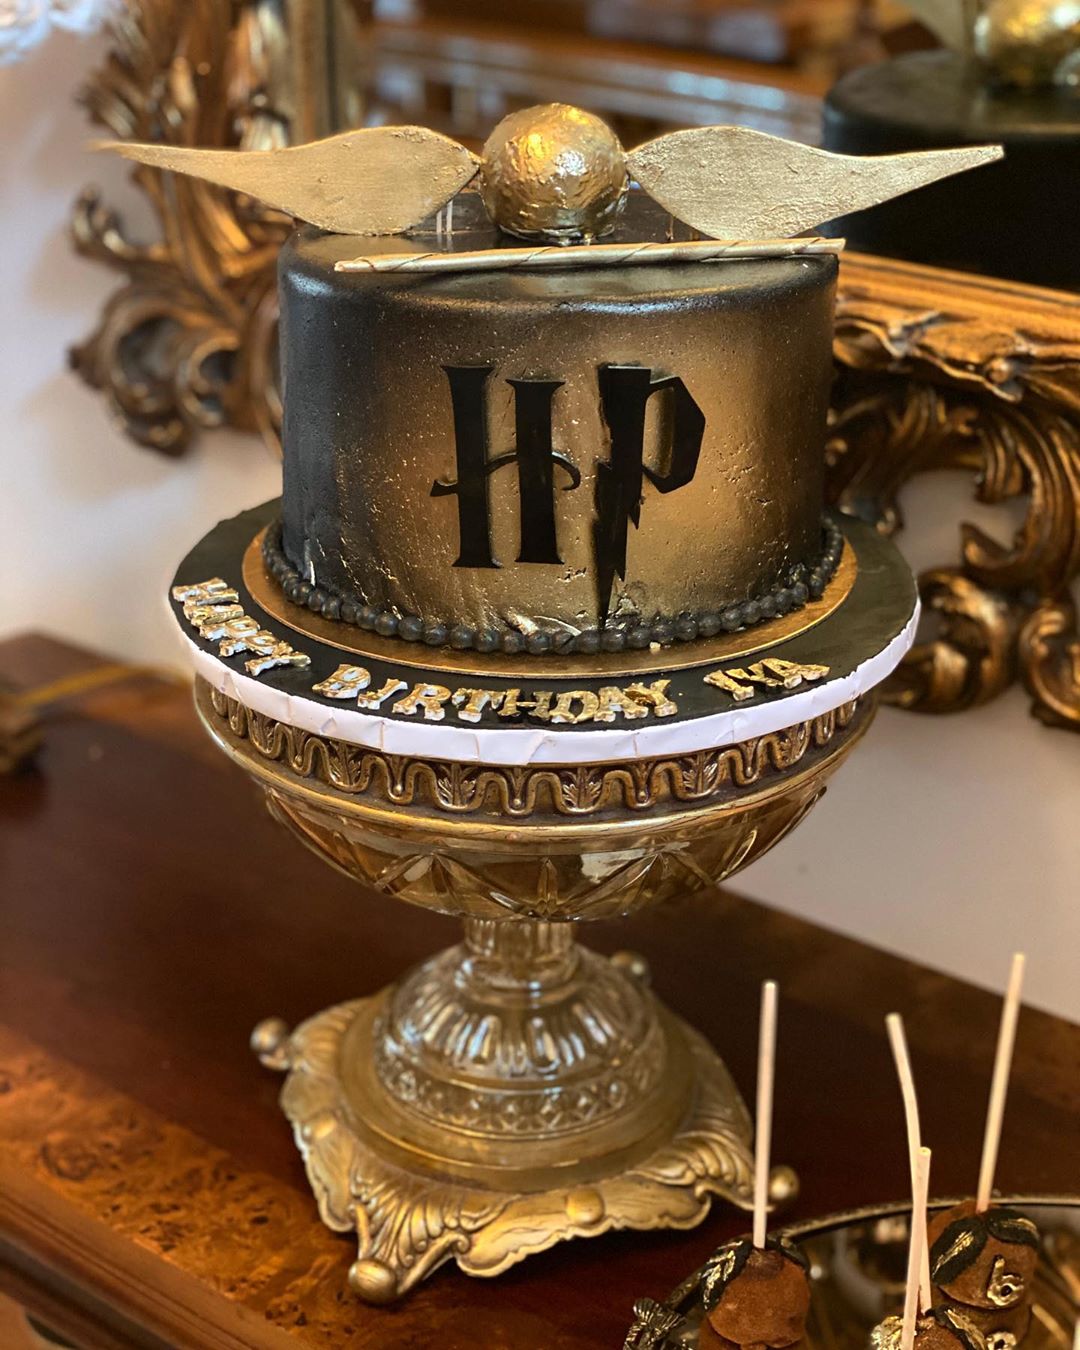 15 Magical Harry Potter Cake Ideas amp Designs That Are Breathtaking